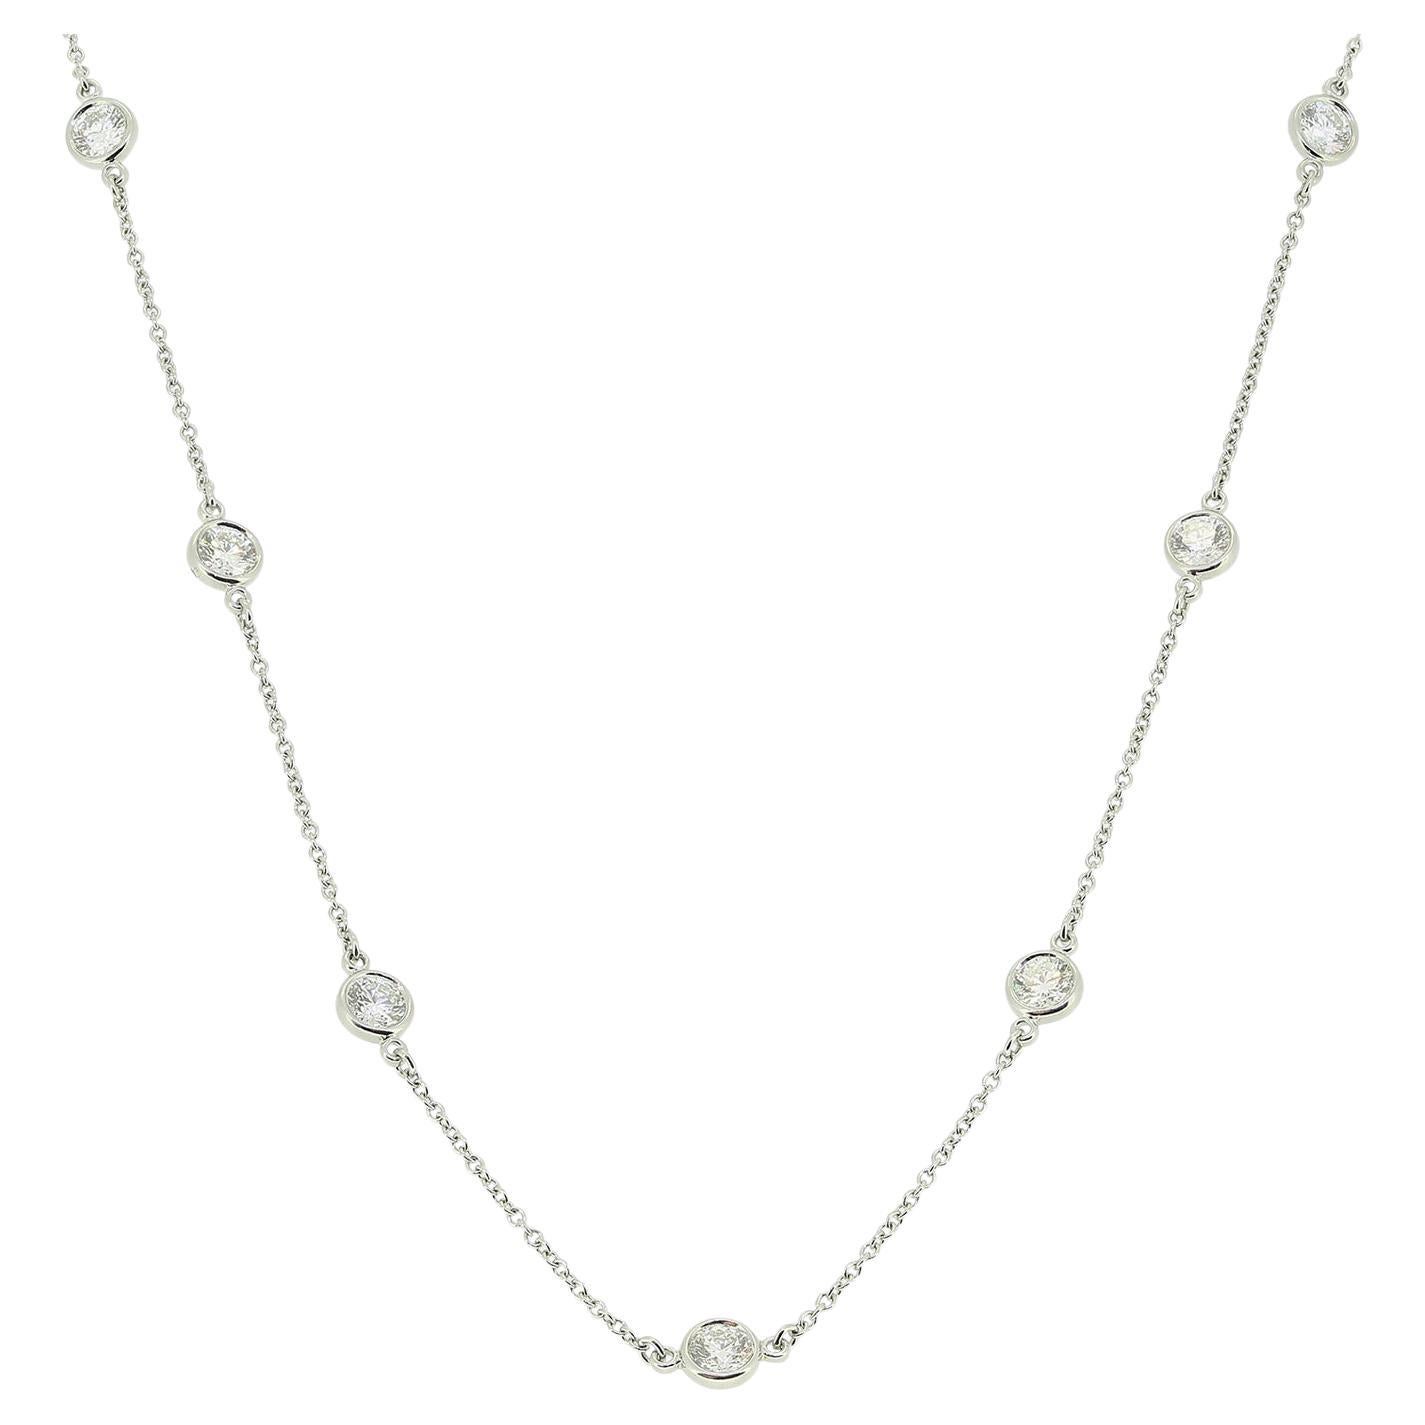 Tiffany & Co. Diamonds by the Yard Necklace